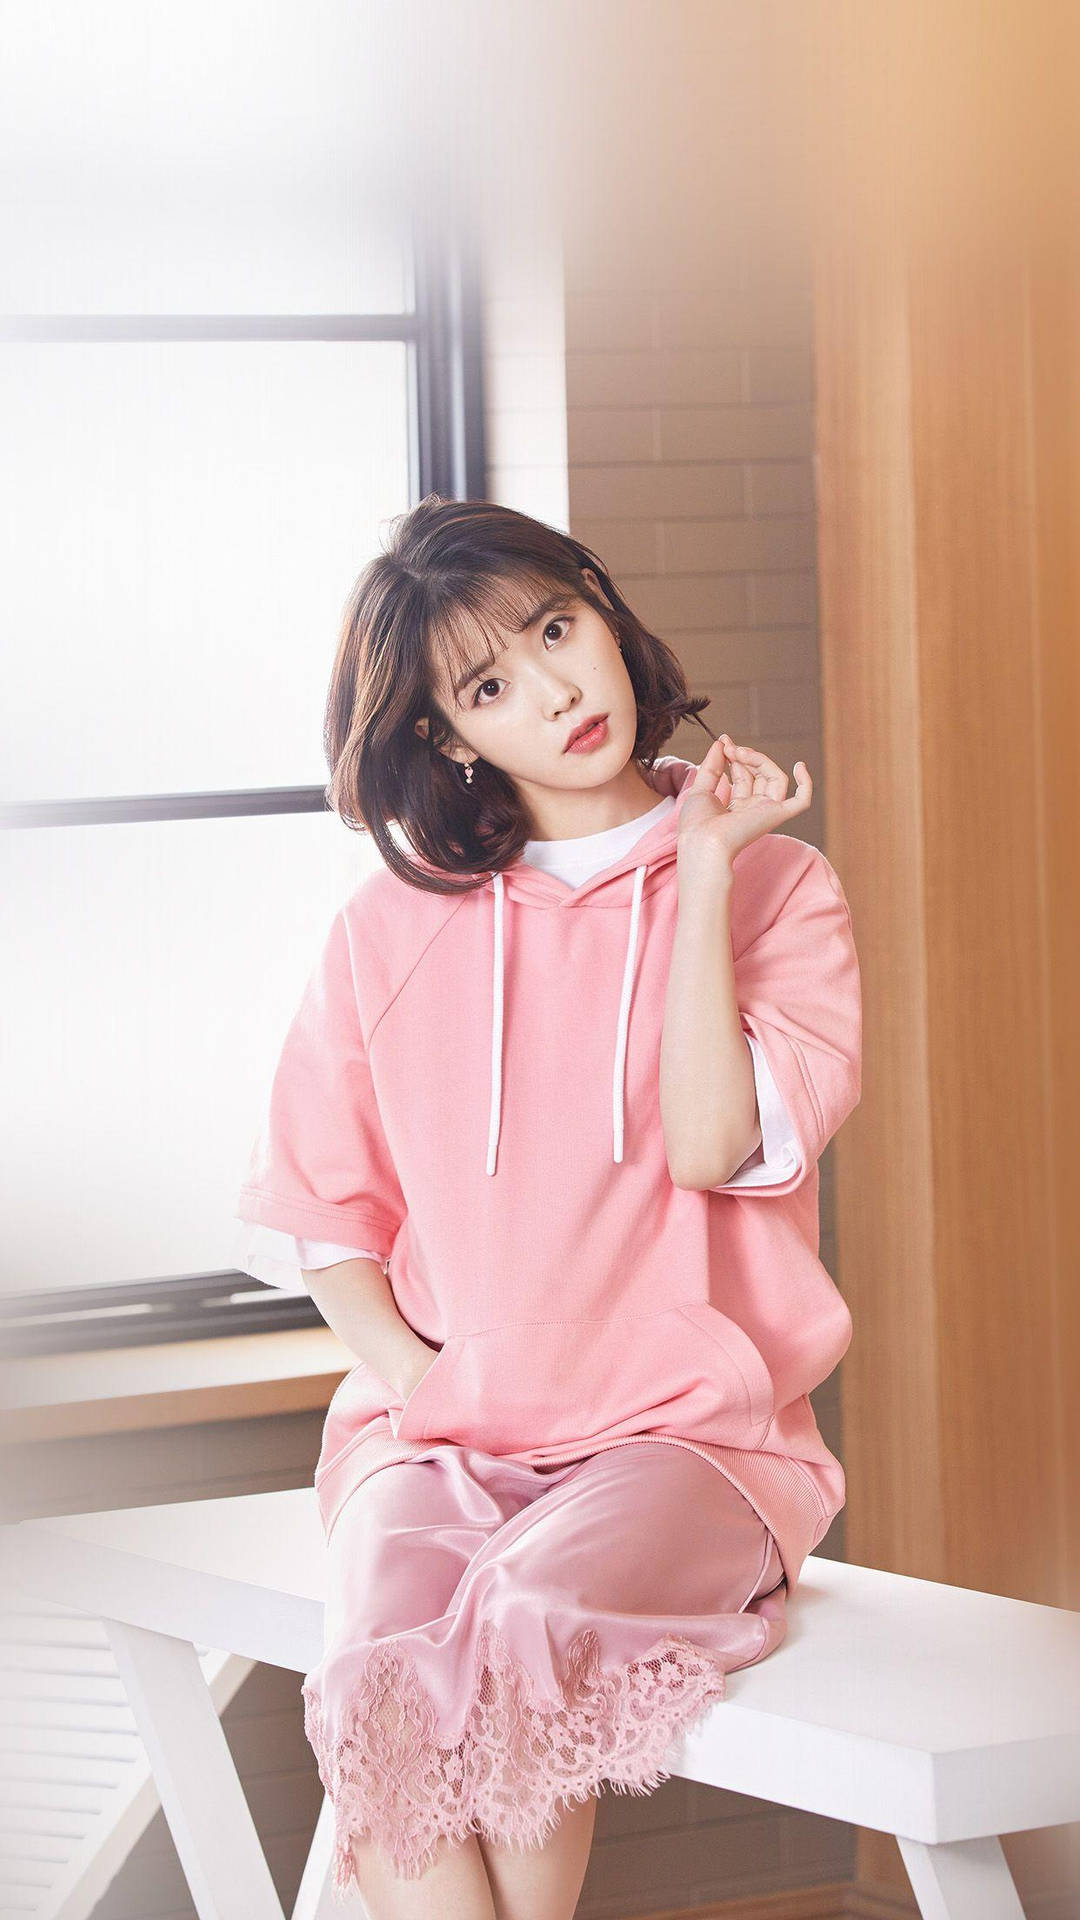 IU In Pastel Pink Outfit Wallpaper